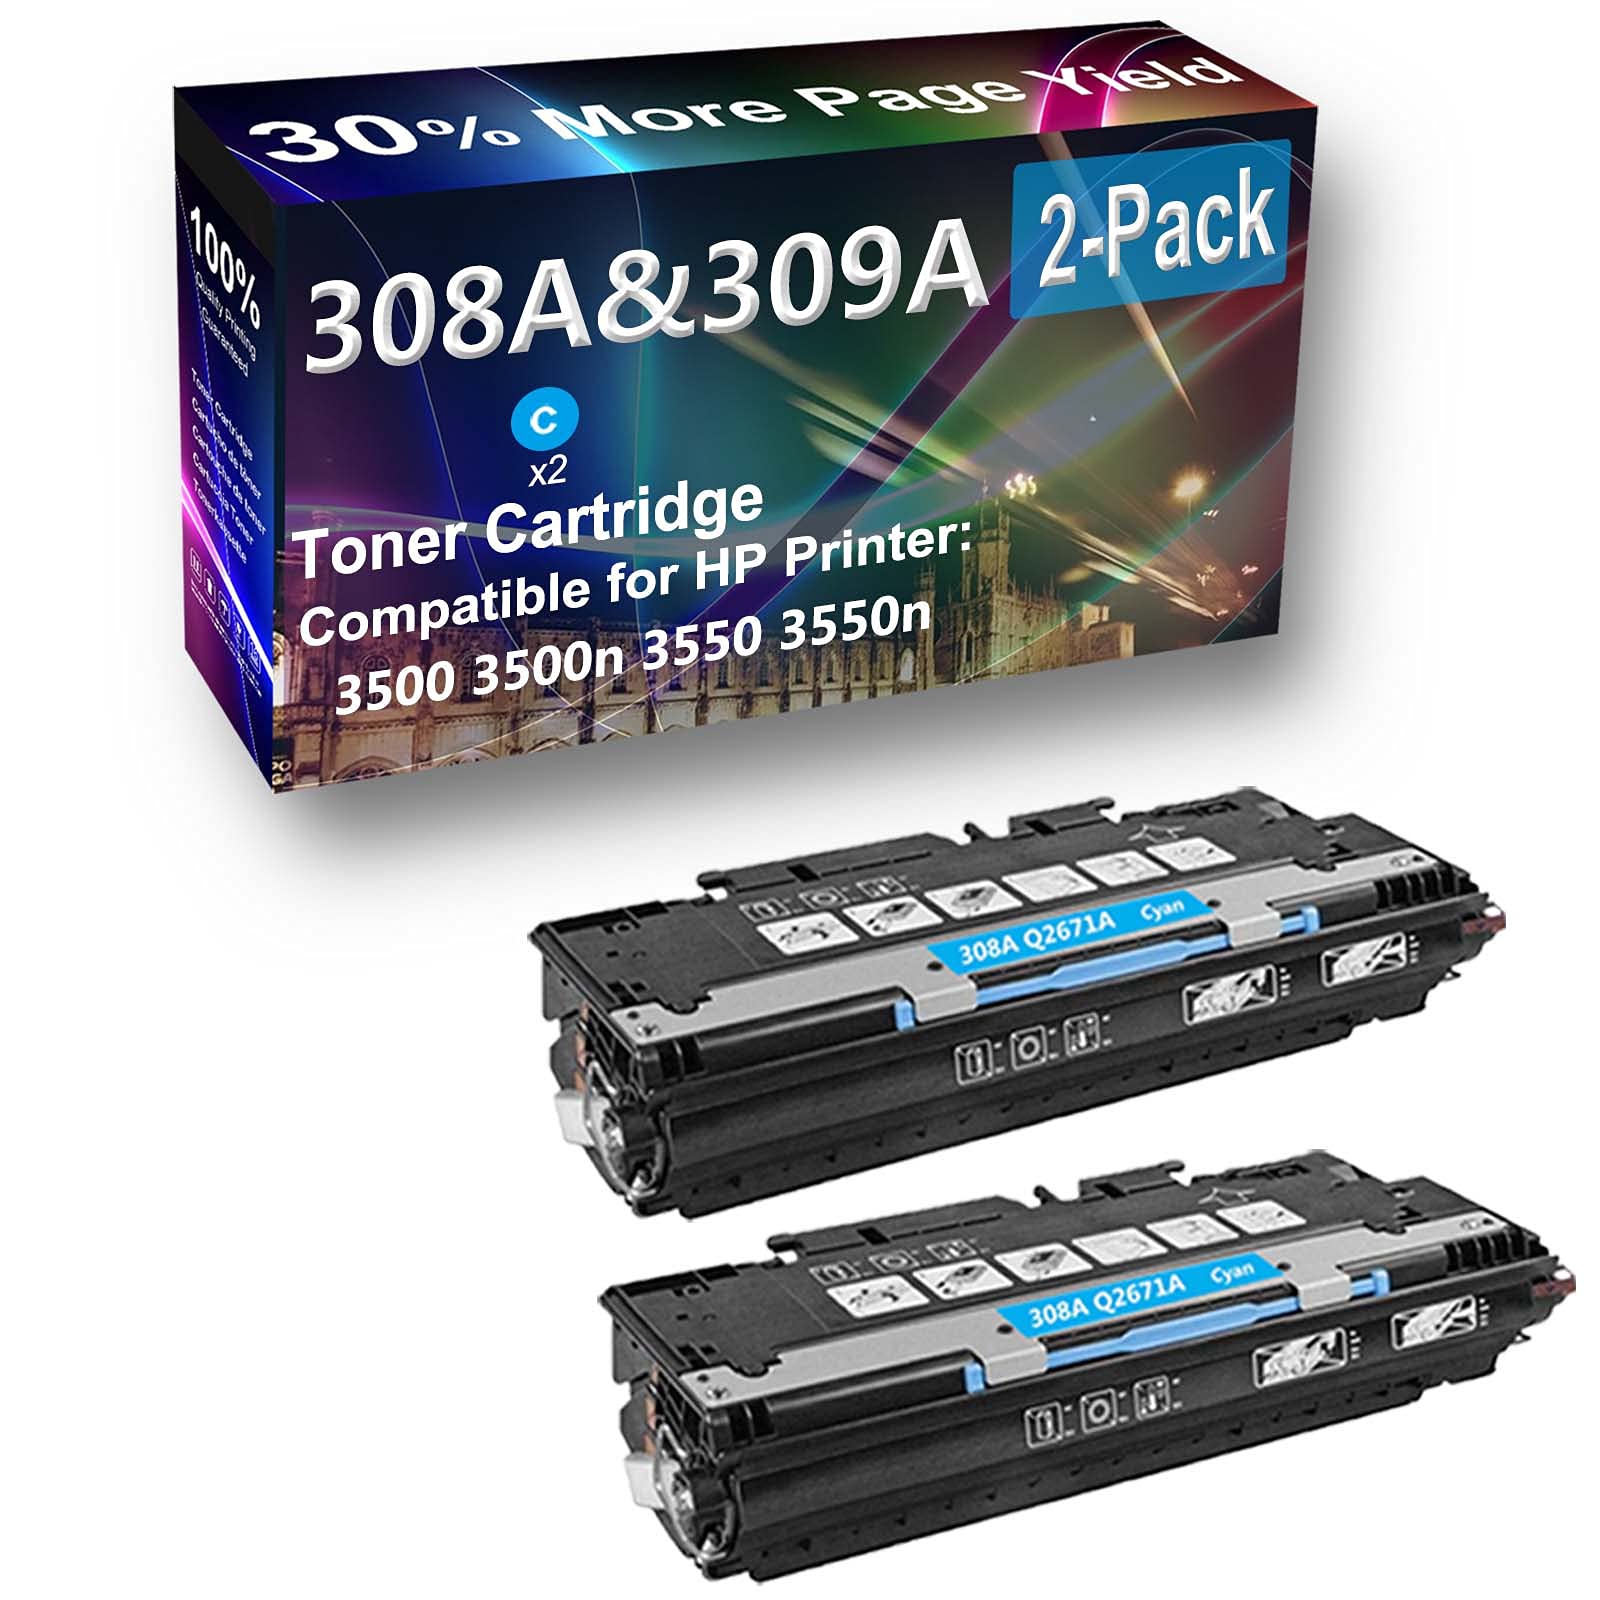 2-Pack (Cyan) Compatible High Yield 308A (Q2671A) Toner Cartridge use for HP 3550n Printer